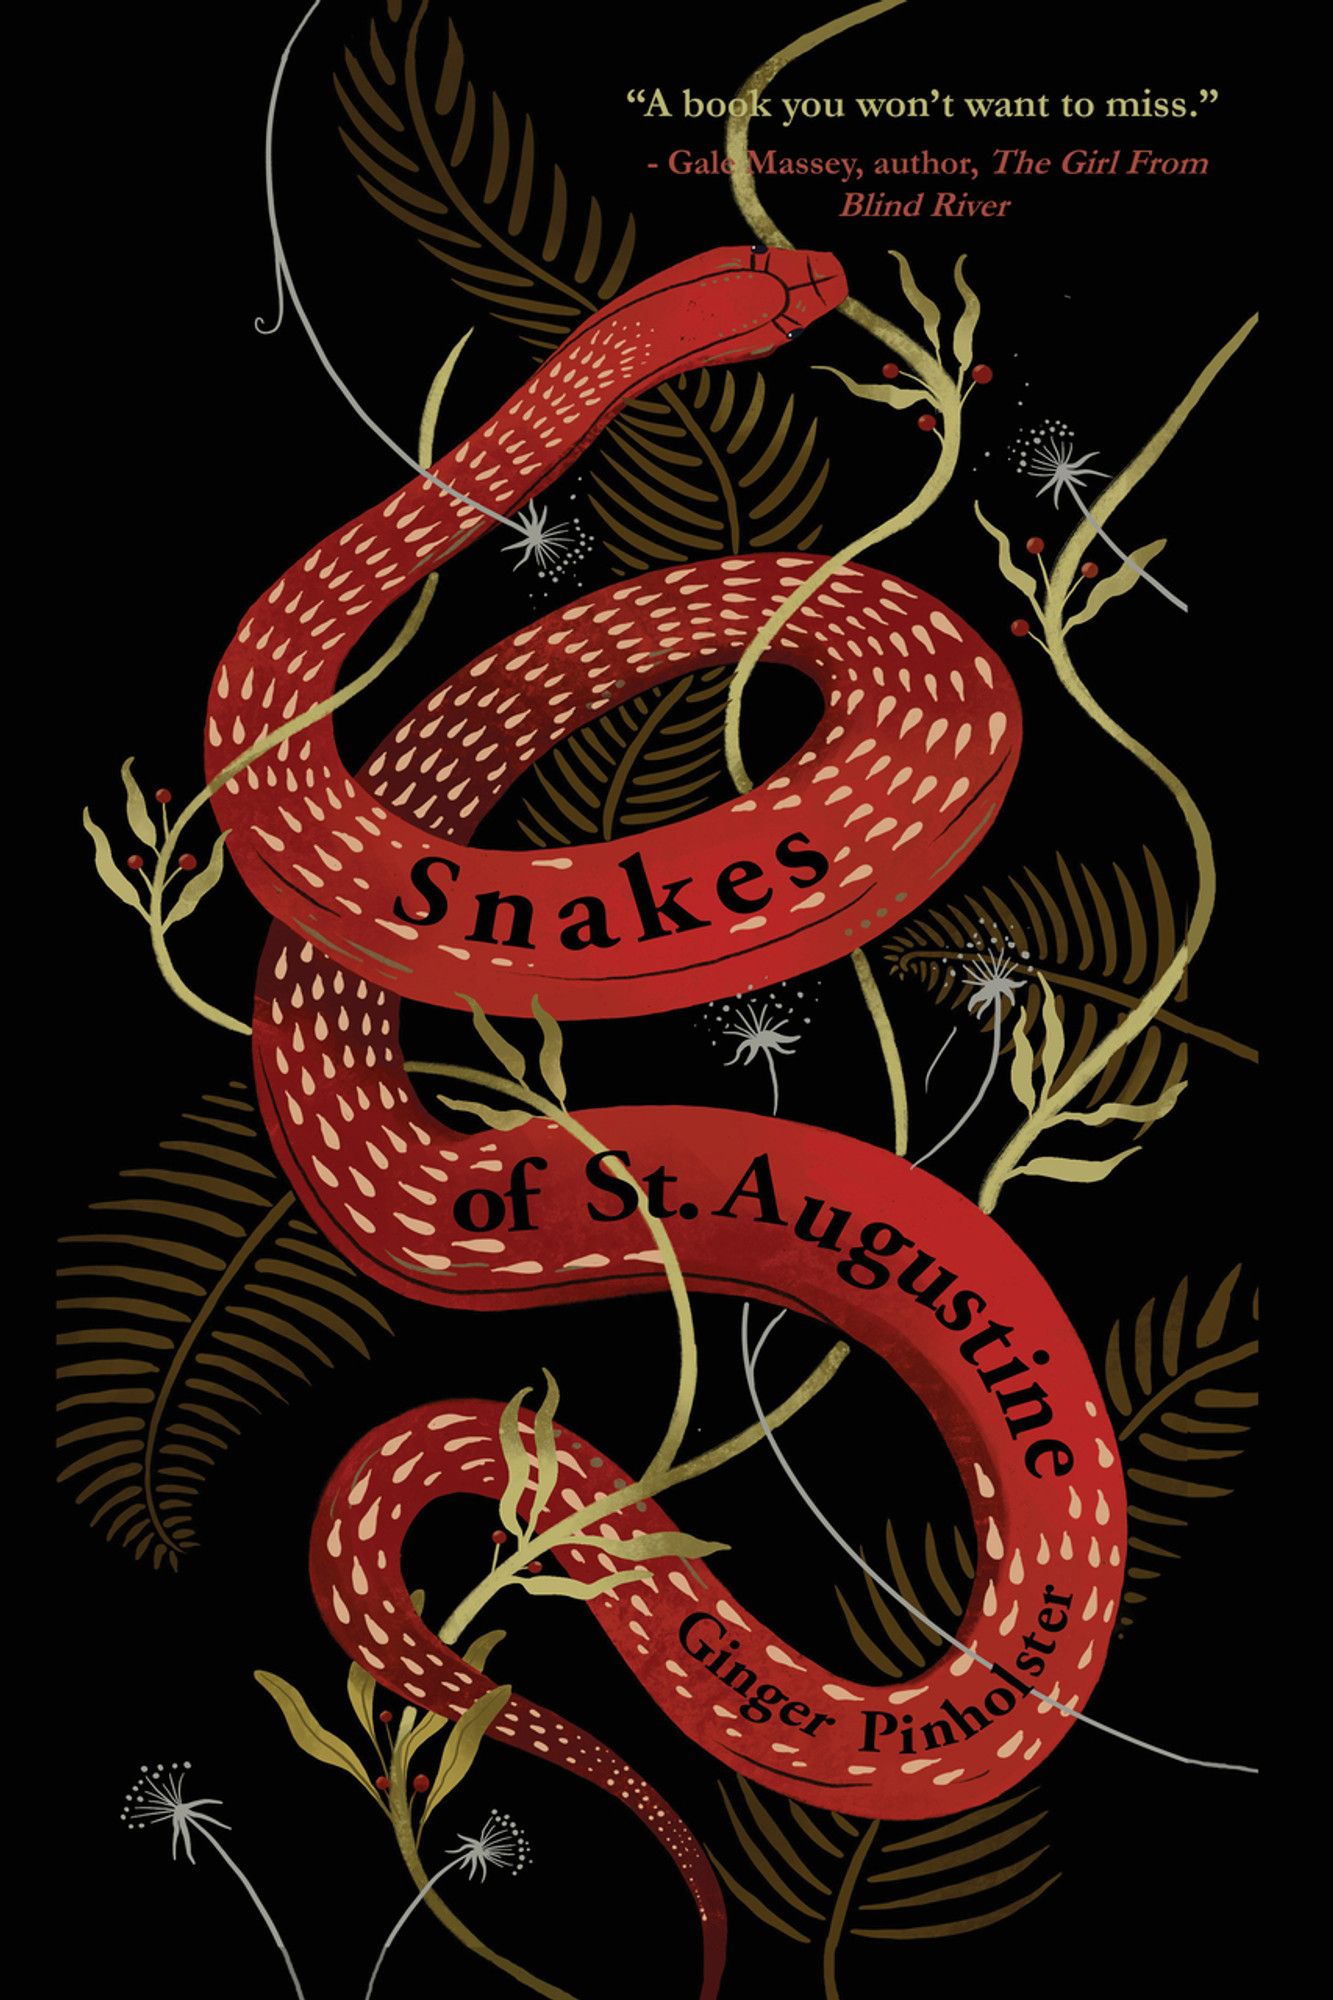 Snakes of St. Augustine